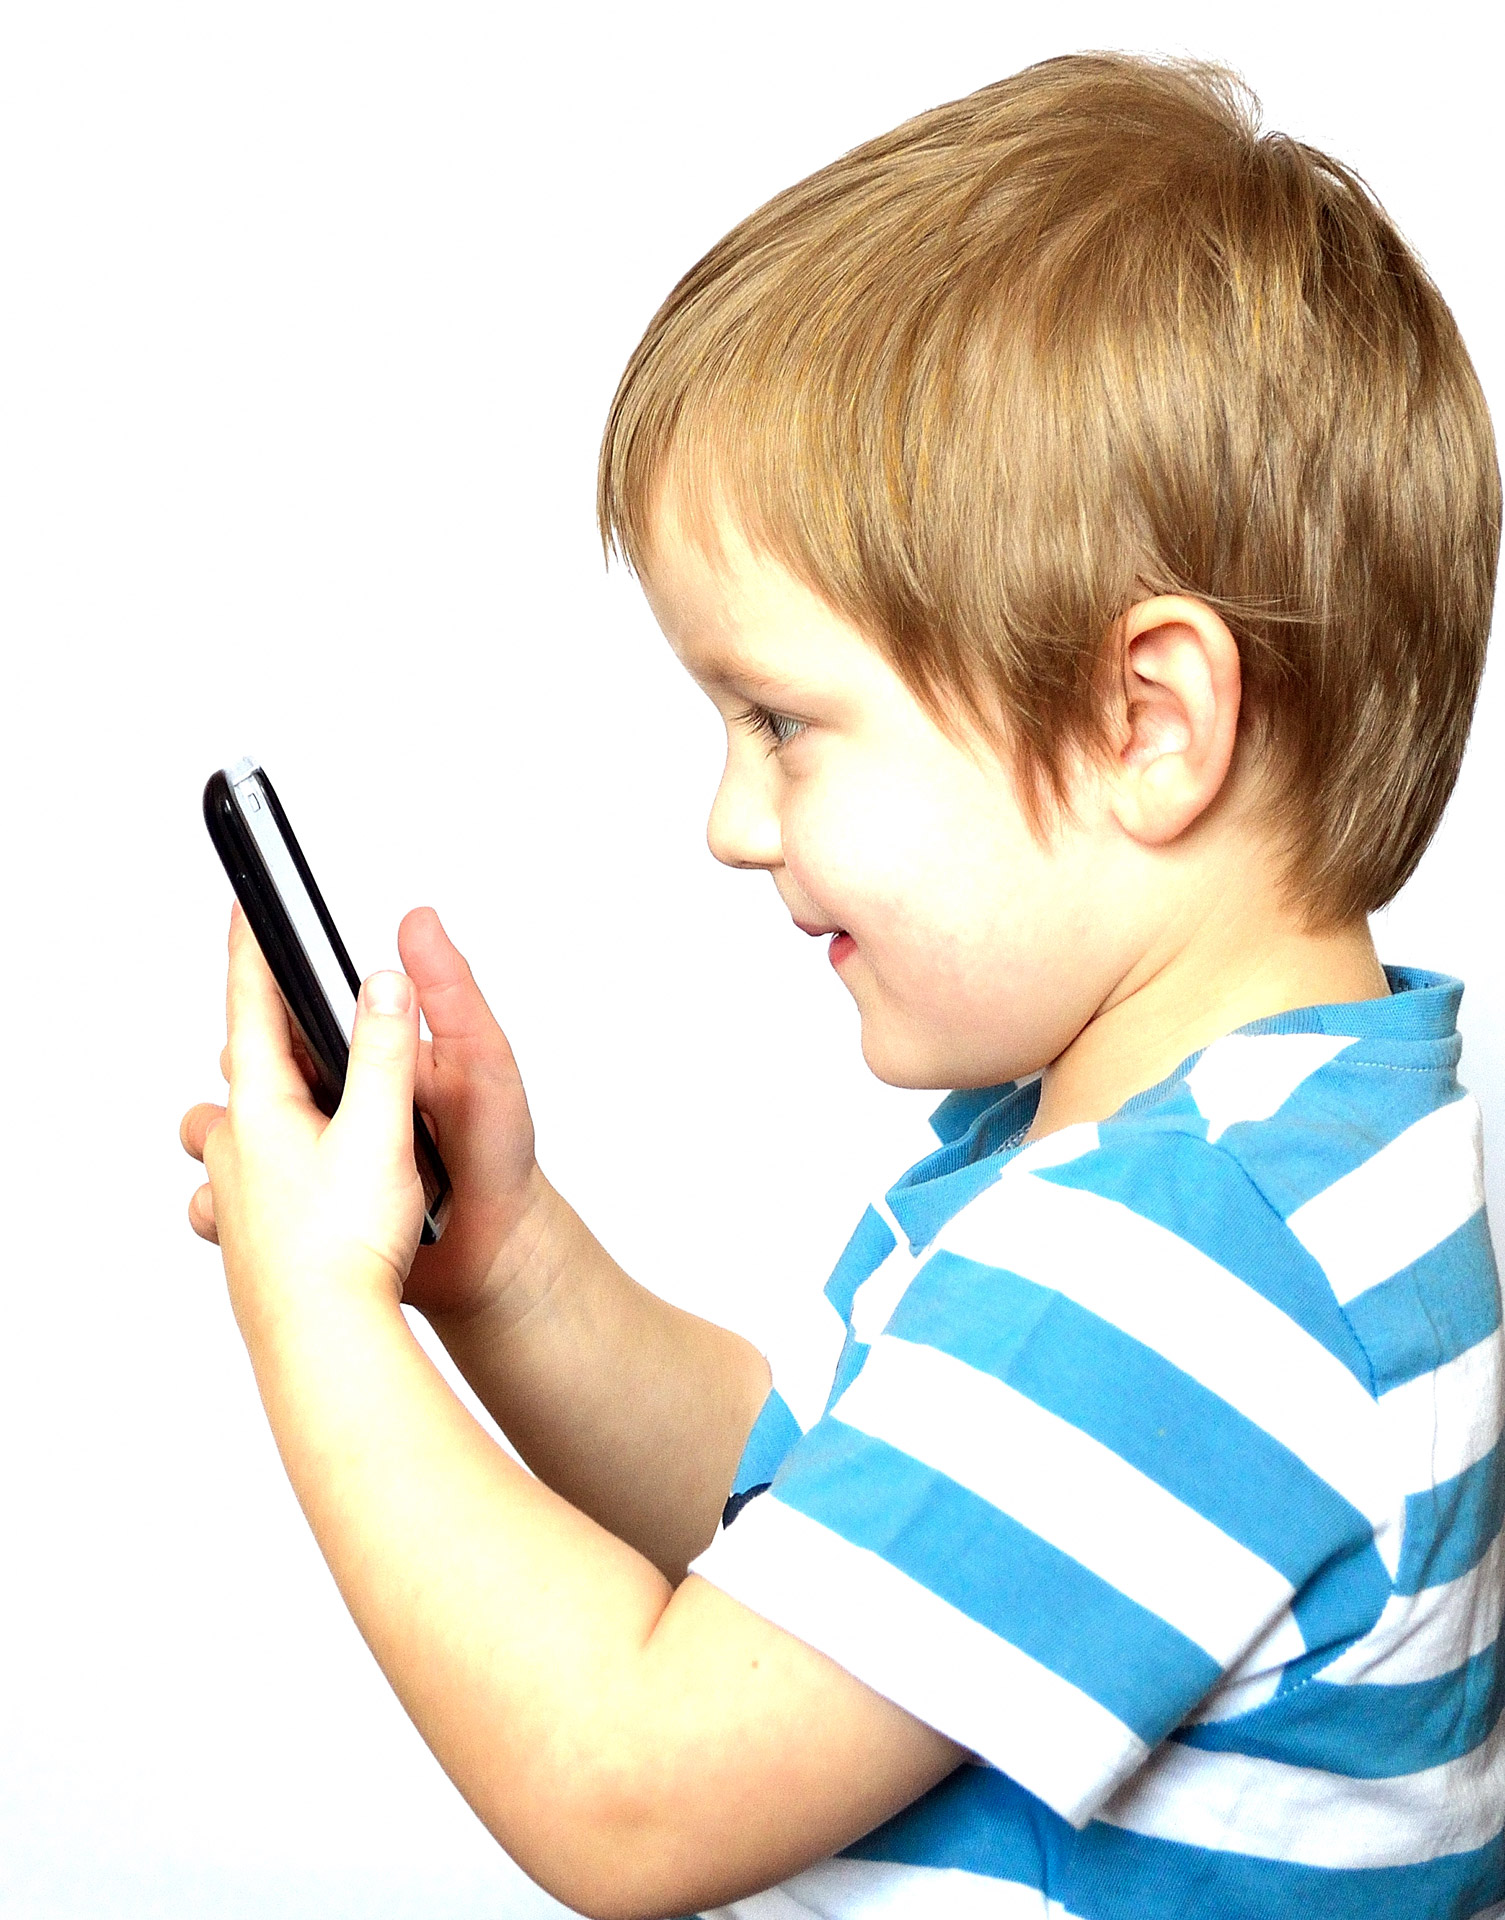 Is Your iPhone Ruining Your Baby's Attention Span?